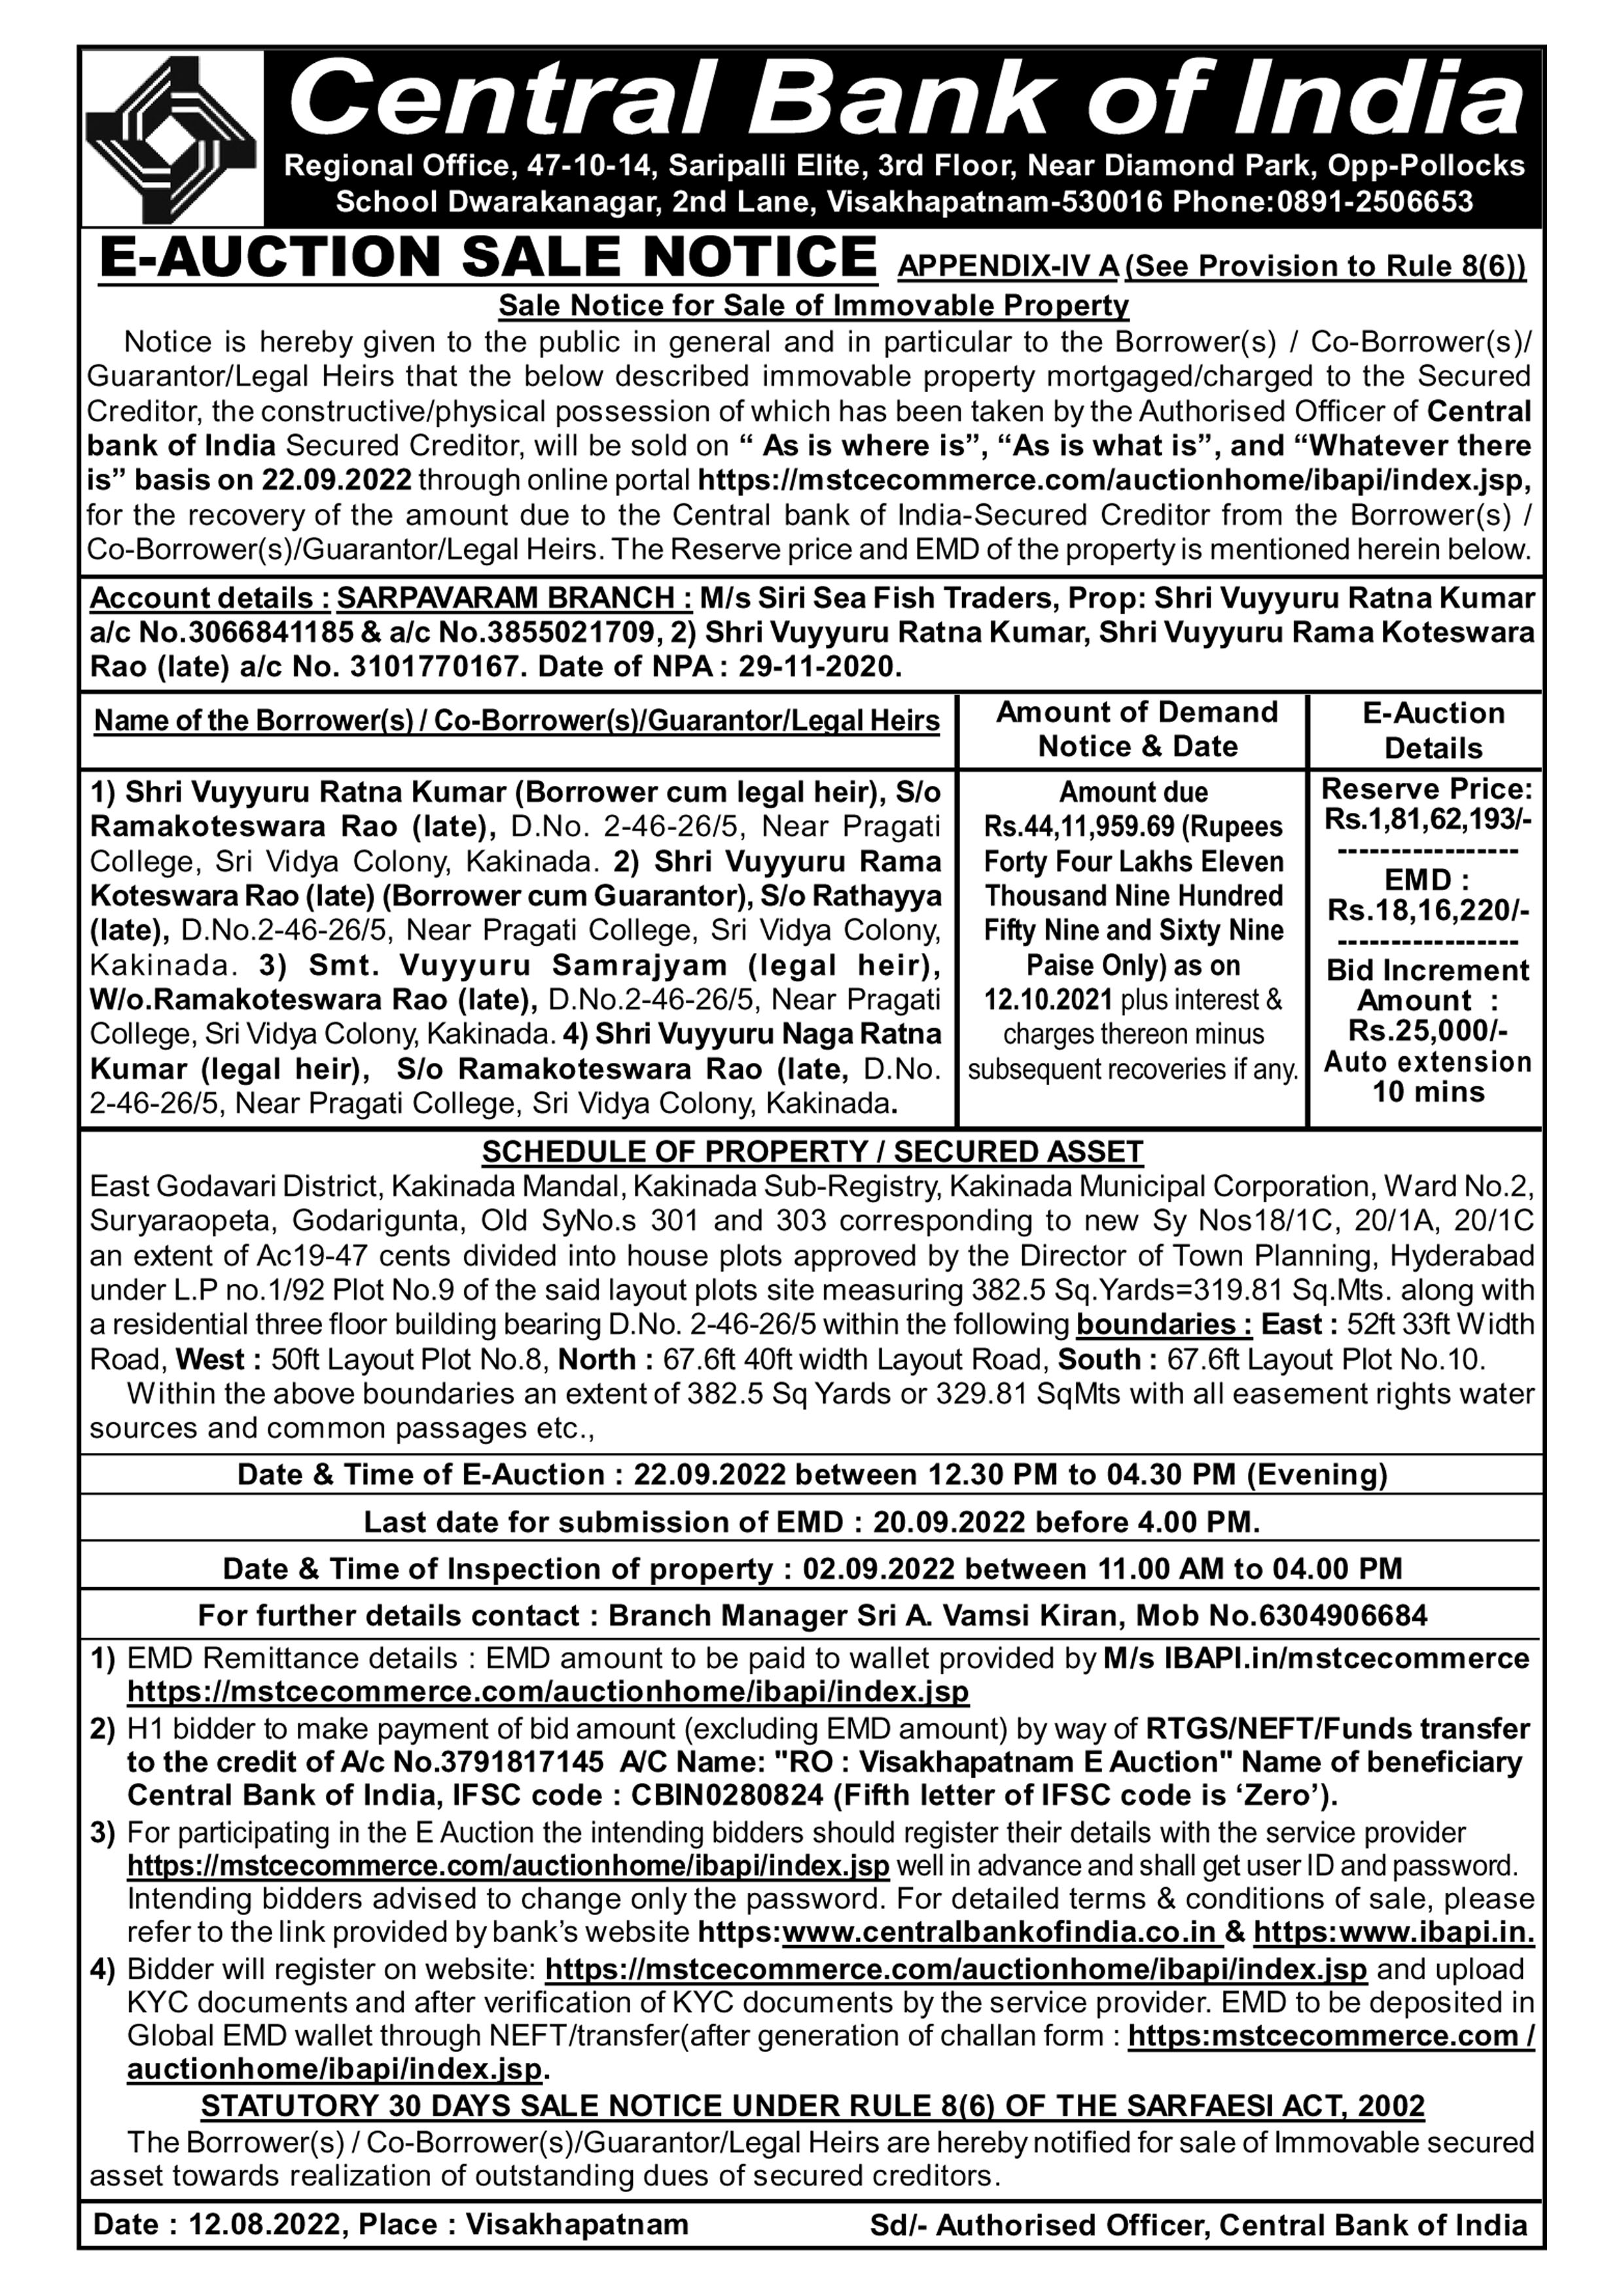 SALE NOTICE PUBLISHED IN TIMES OF INDIA VISAKHAPATNAM ON 13-08-2022